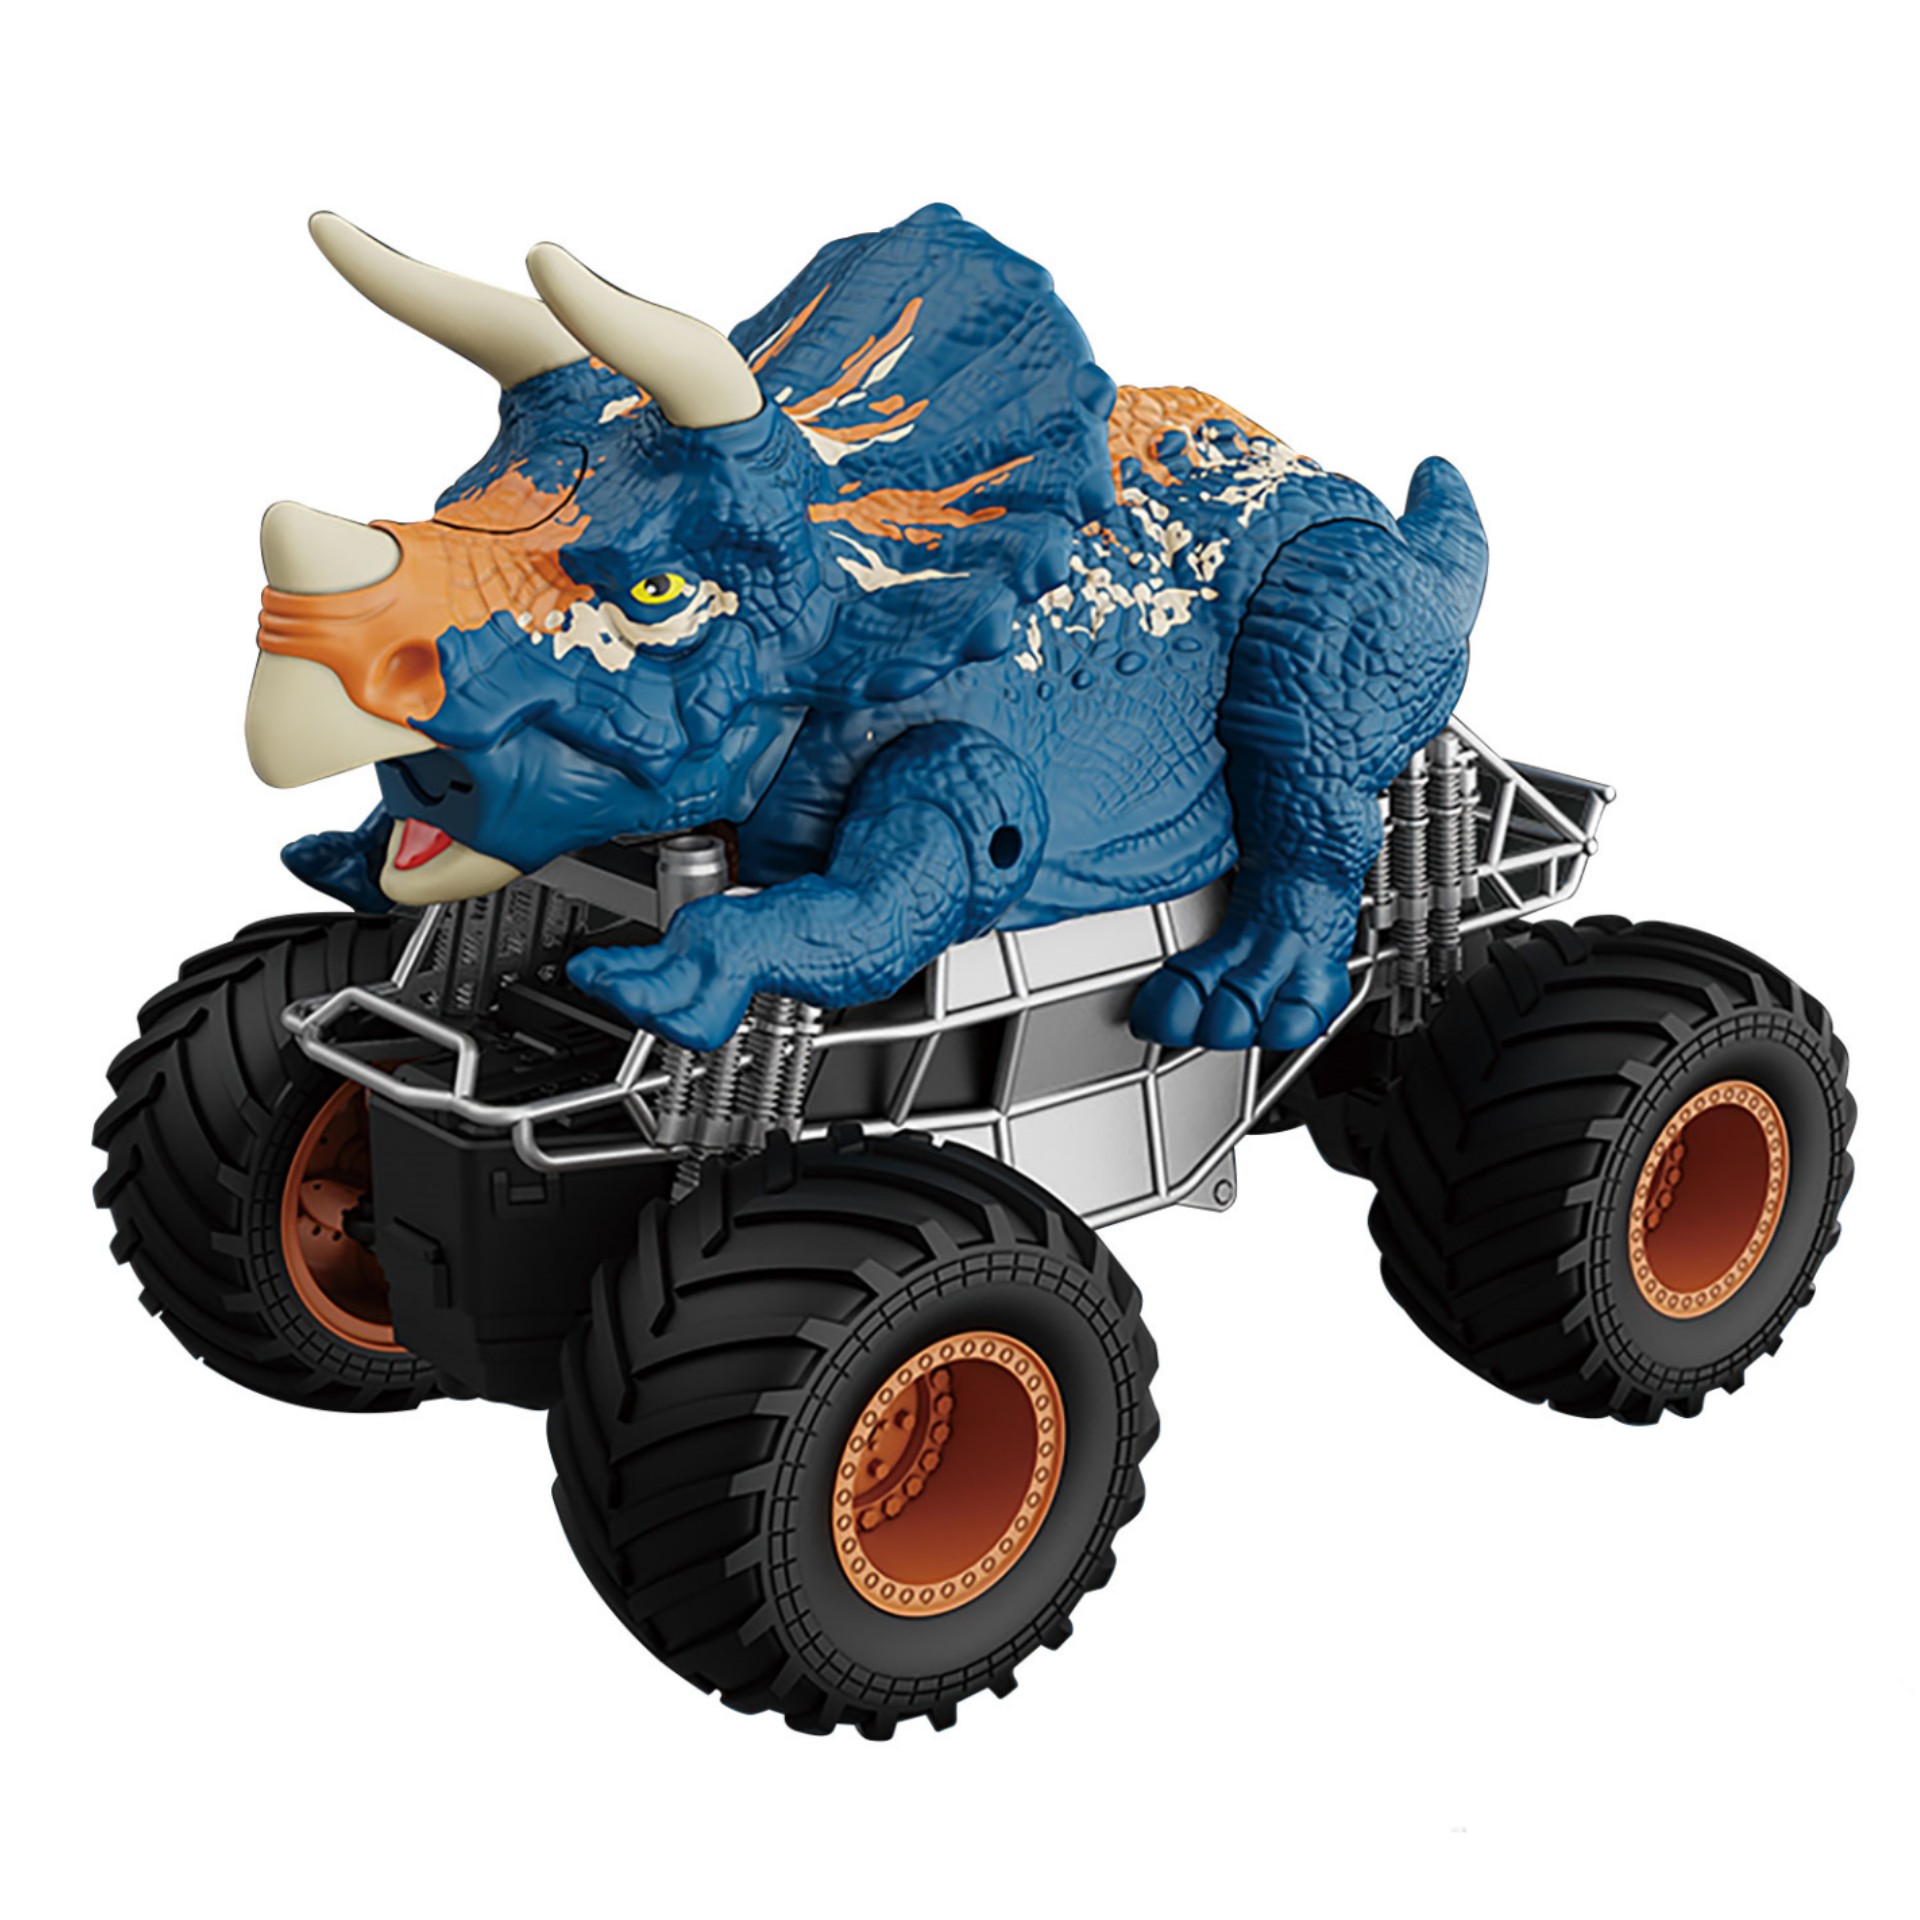 Q160 Kids Remote Control Dinosaur Car With Light Spray 2.4 GHz Rechargeable Rc Stunt Off-road Vehicle Toys For Kids Birthday Gifts